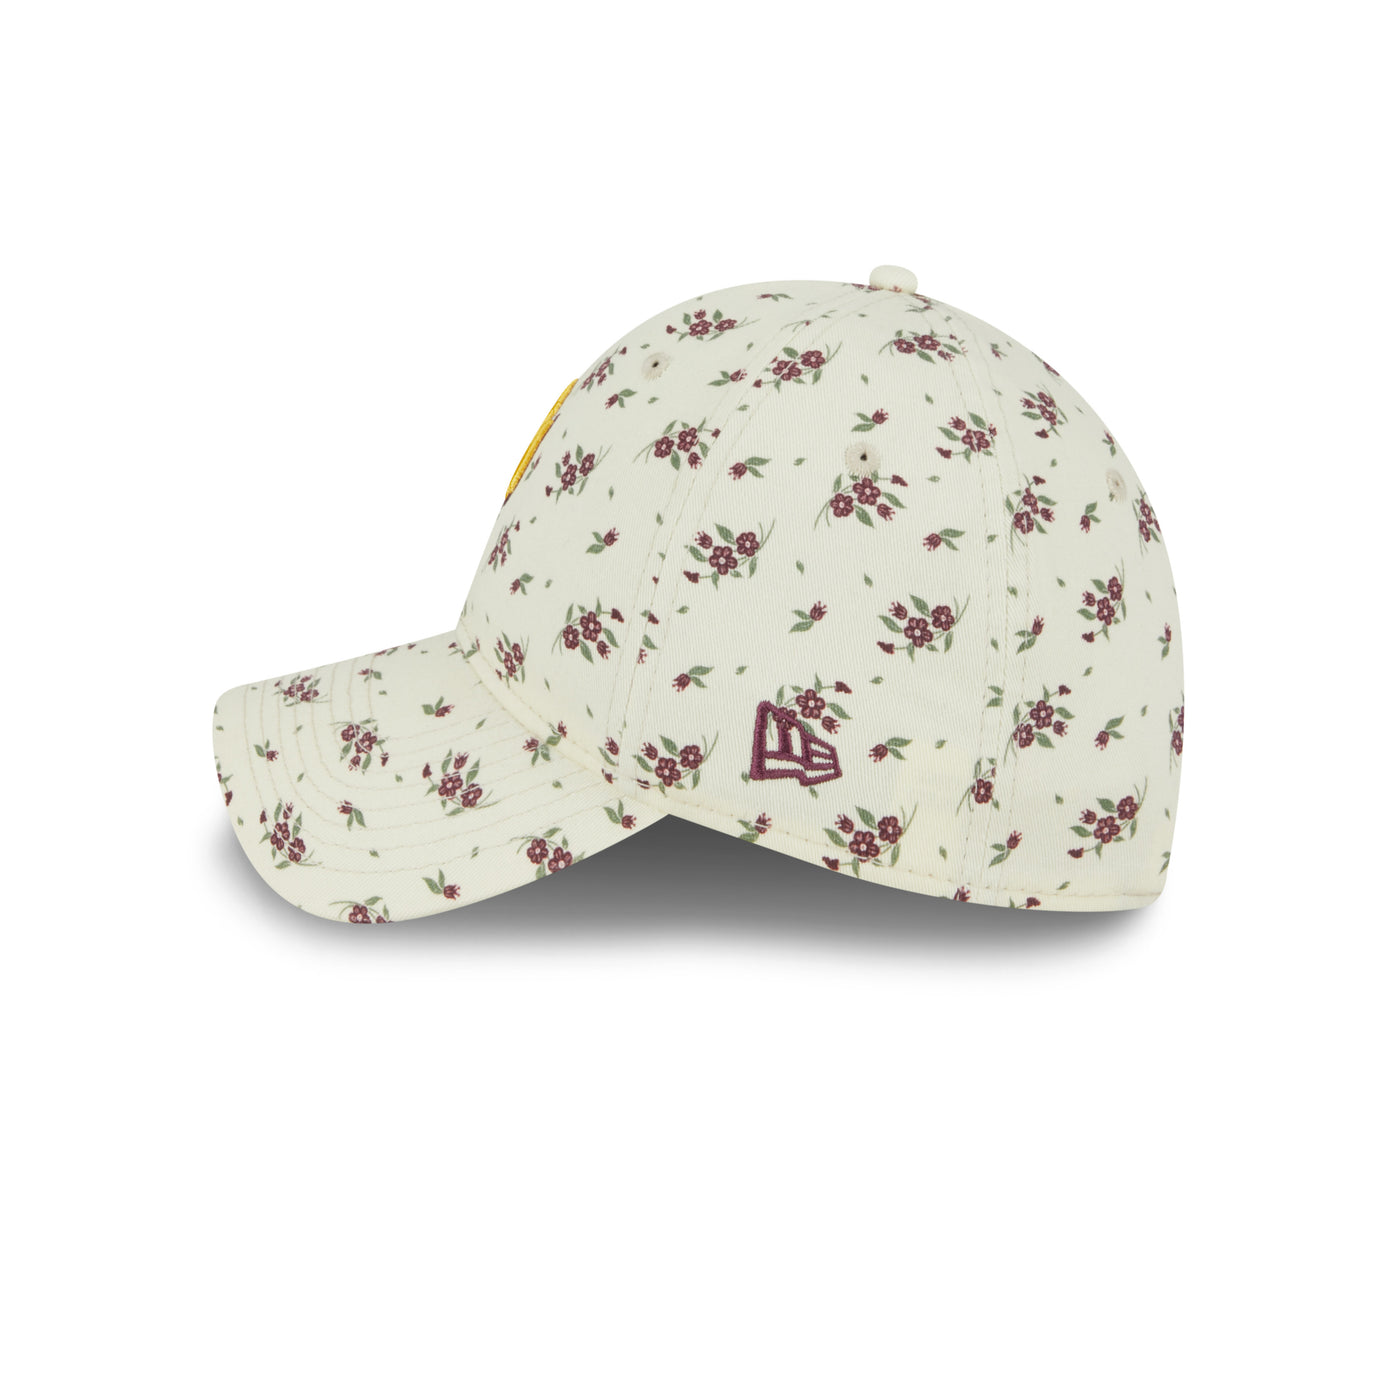 Side view of cream colored flower patterned hat. Has the new era logo on the side in maroon.